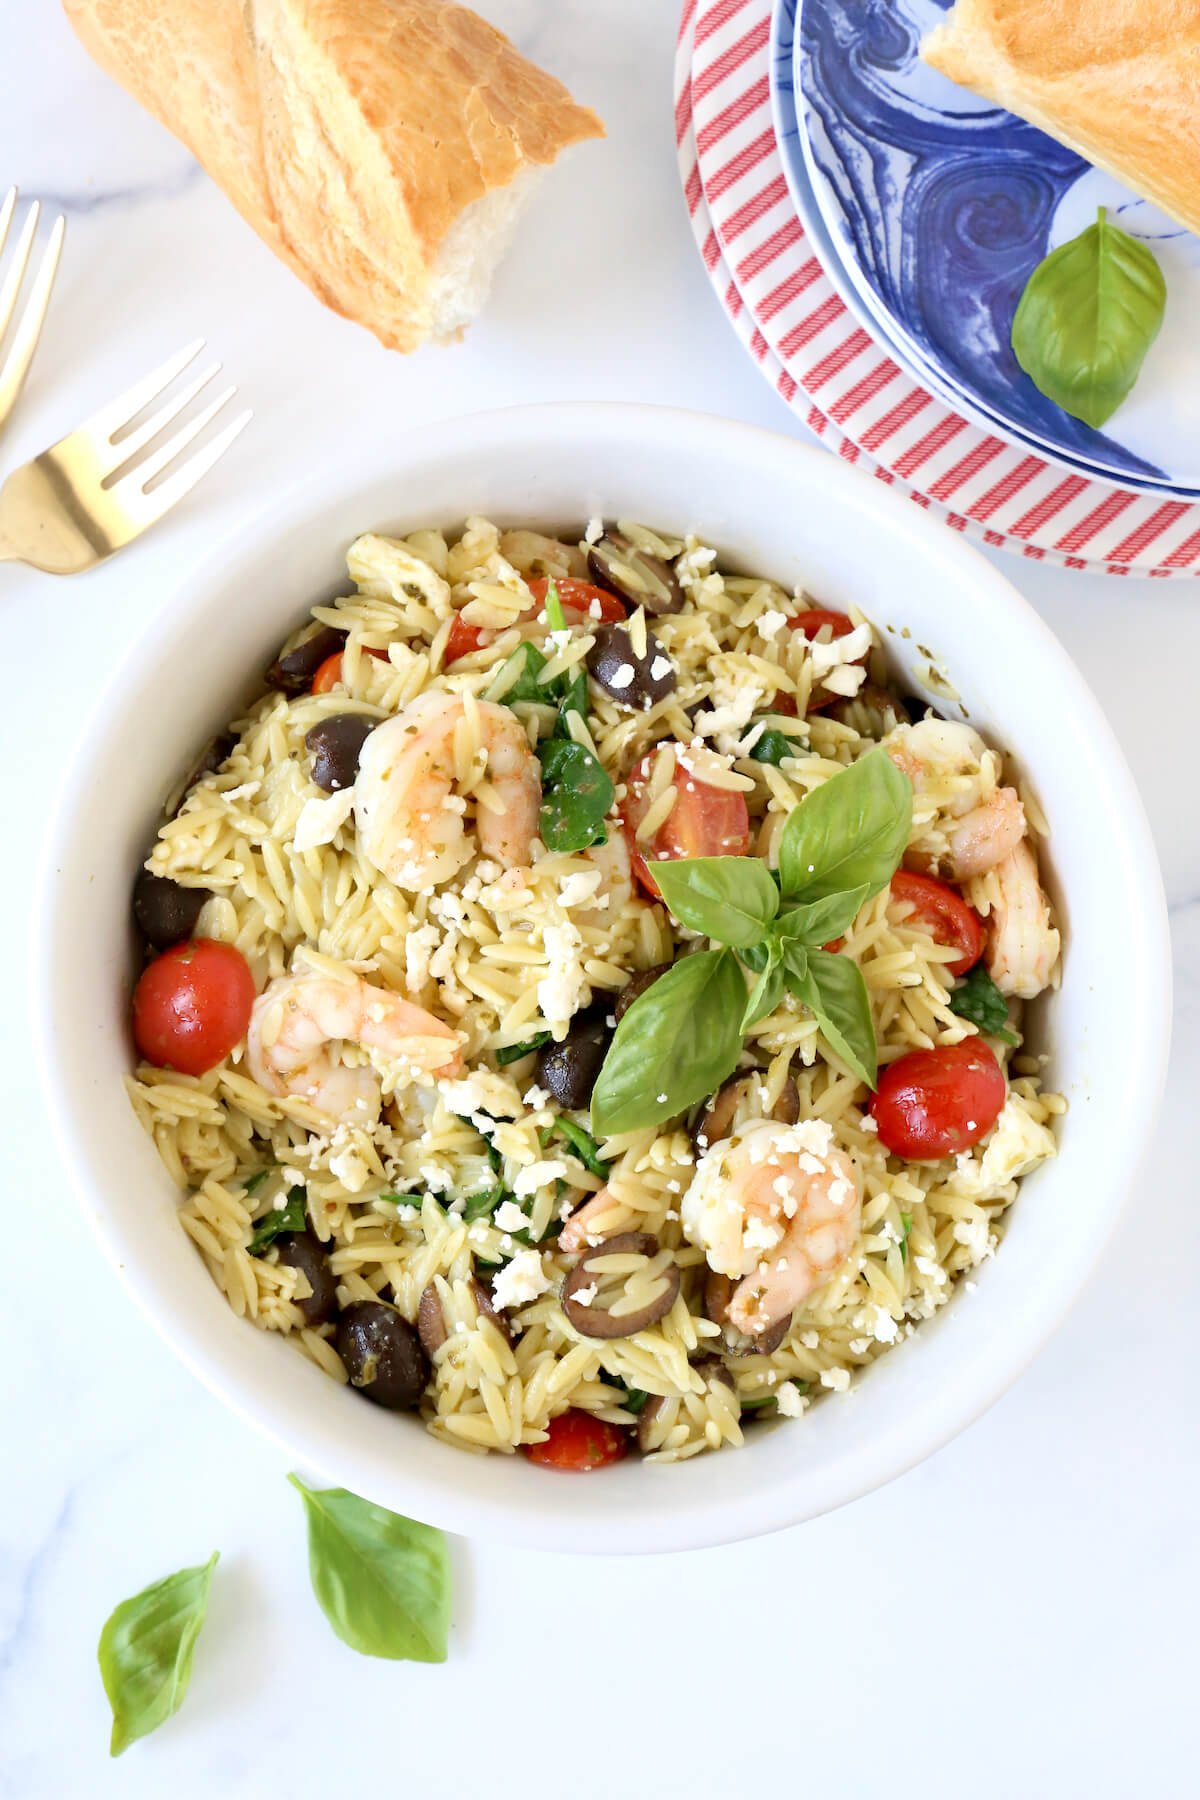 A white bowl filled with orzo, shrimp, tomatoes next to a piece of french bread and a stack of plates.  